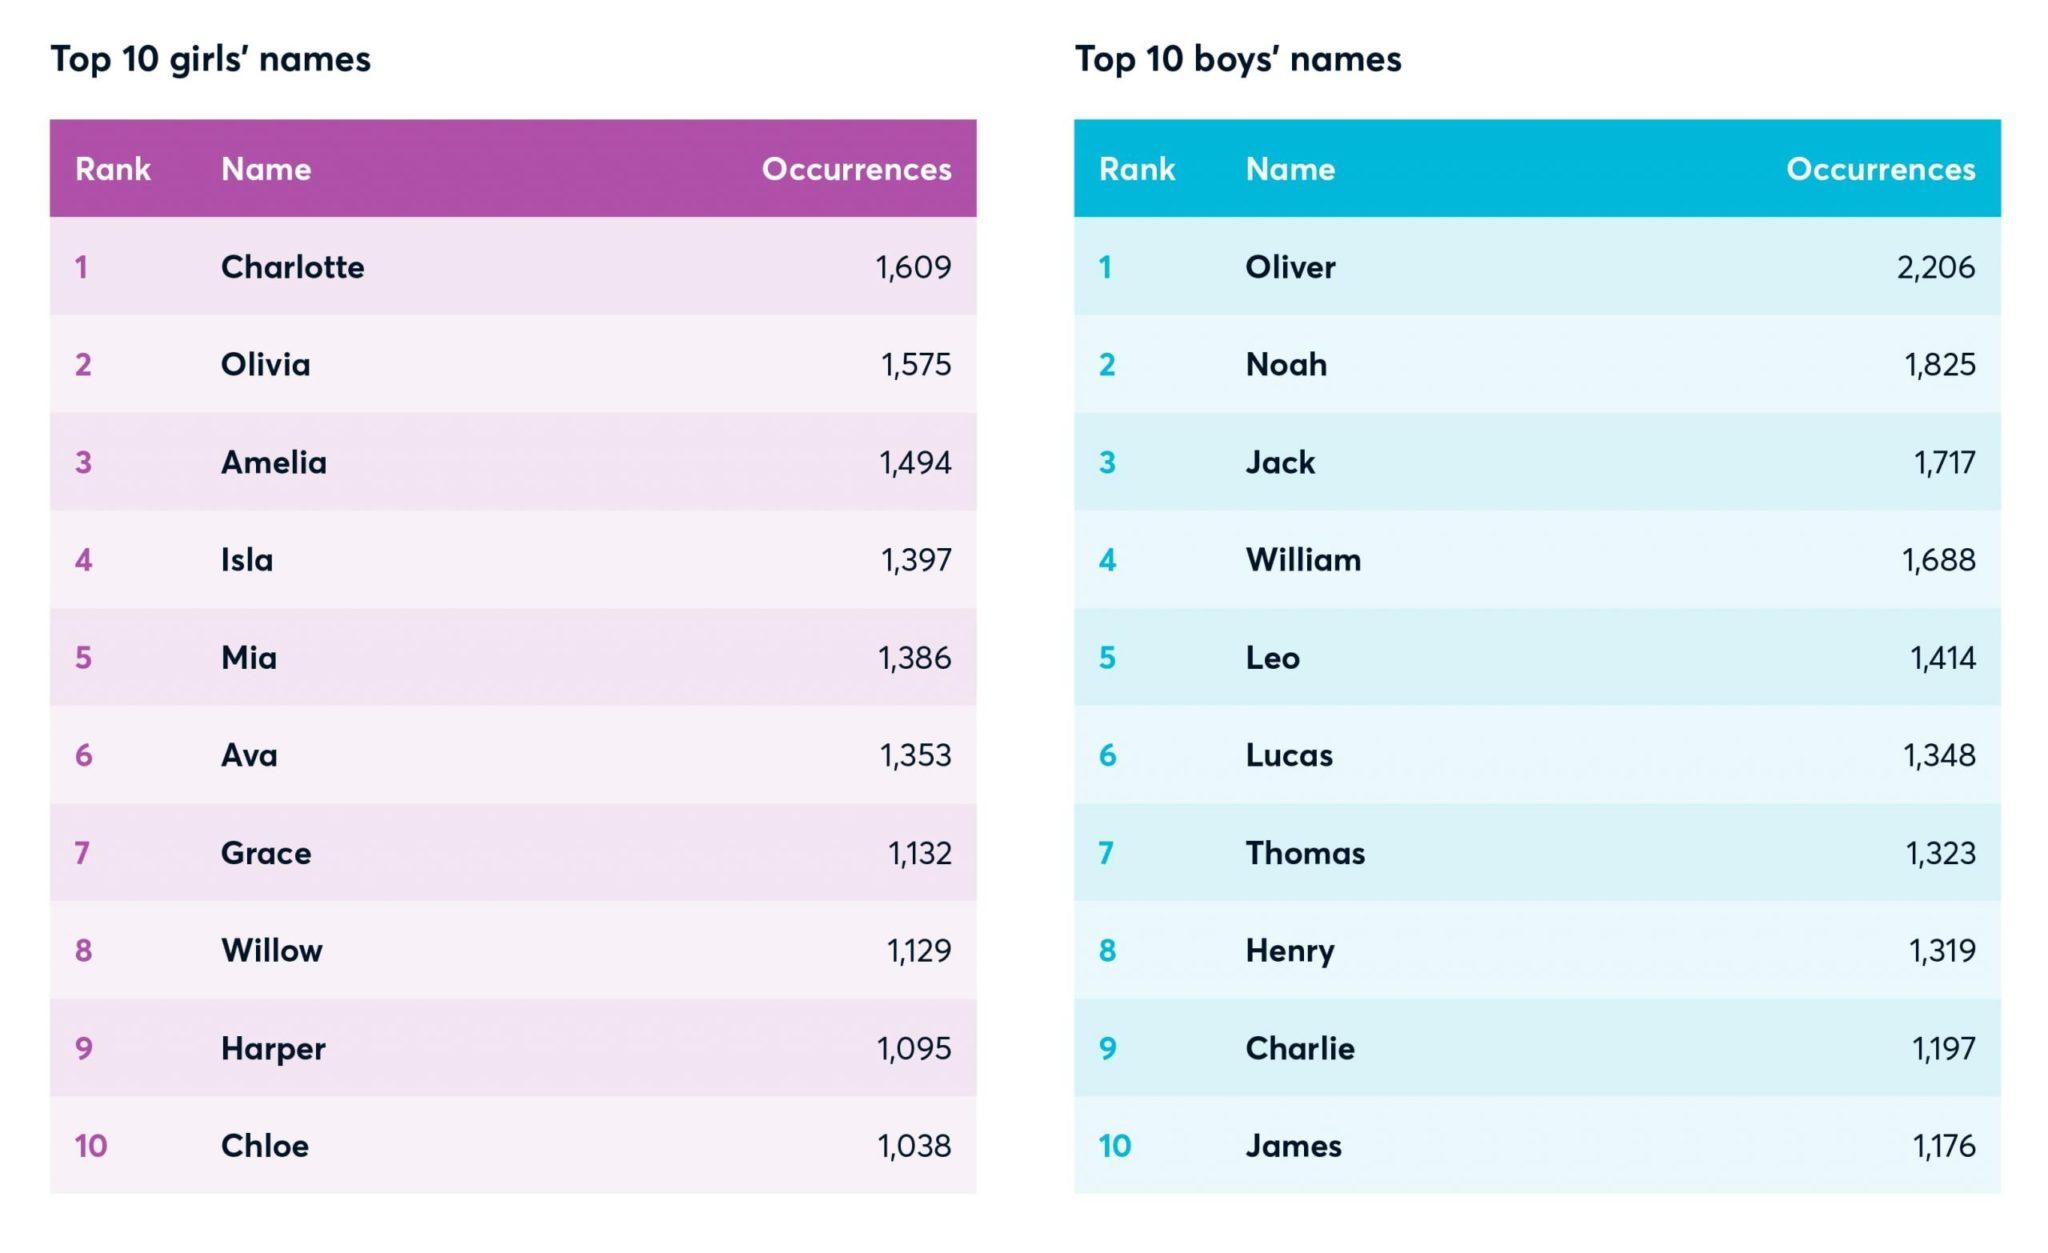 text graphic which reads top 10 girls names: 1 charlotte, 2 olivia, 3 amelia, 4 isla, 5 mia, 6 ava, 7 grace, 8 willow, 9 harper 10 chloe. top 10 boys name: 1 oliver, 2 noah, 3 jack, 4 william, 5 leo, 6 lucas, 7 thomas, 8 henry, 9 charlie, 10 james 